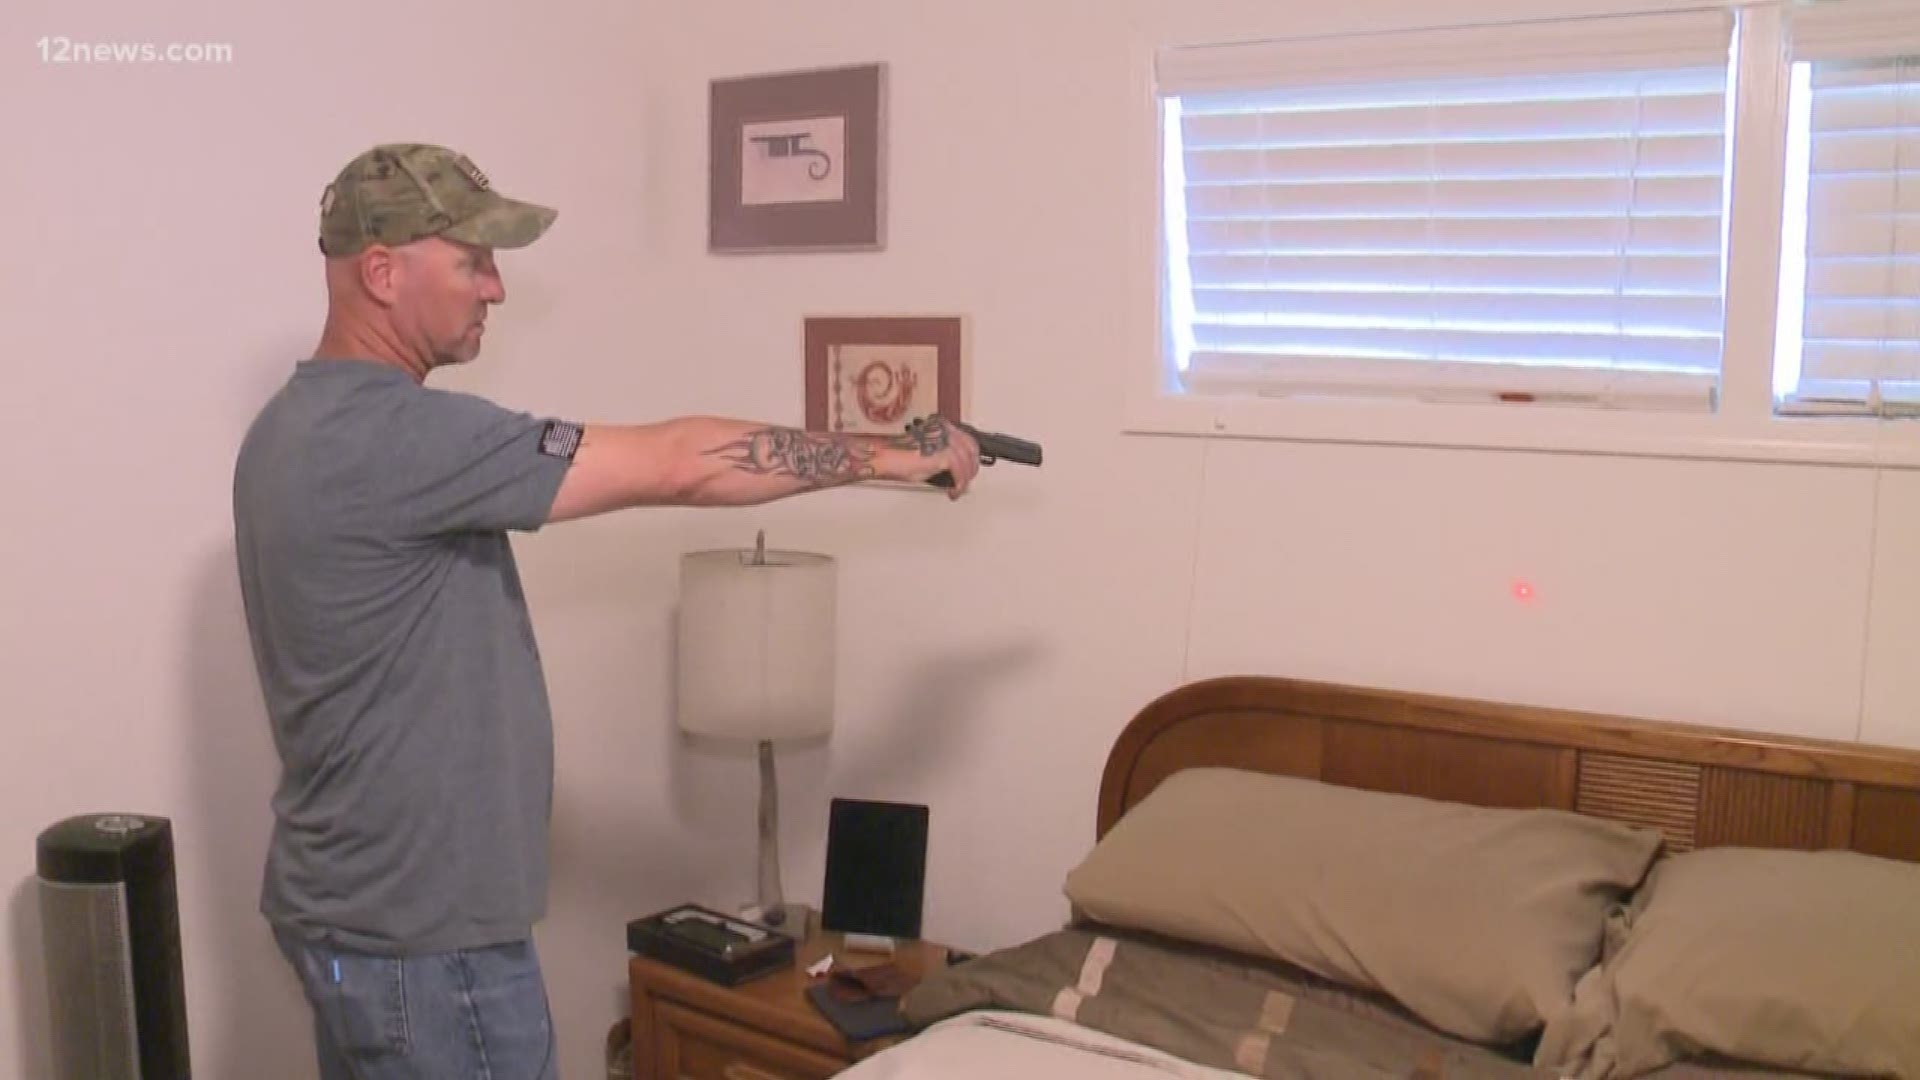 An intruder broke into several homes in Phoenix early Monday morning. One of the homeowners, Gage Underhill, tells 12 News what happened when he woke up to find the man staring at him from the foot of his bed. The intruder got into both homes through unlocked doors.